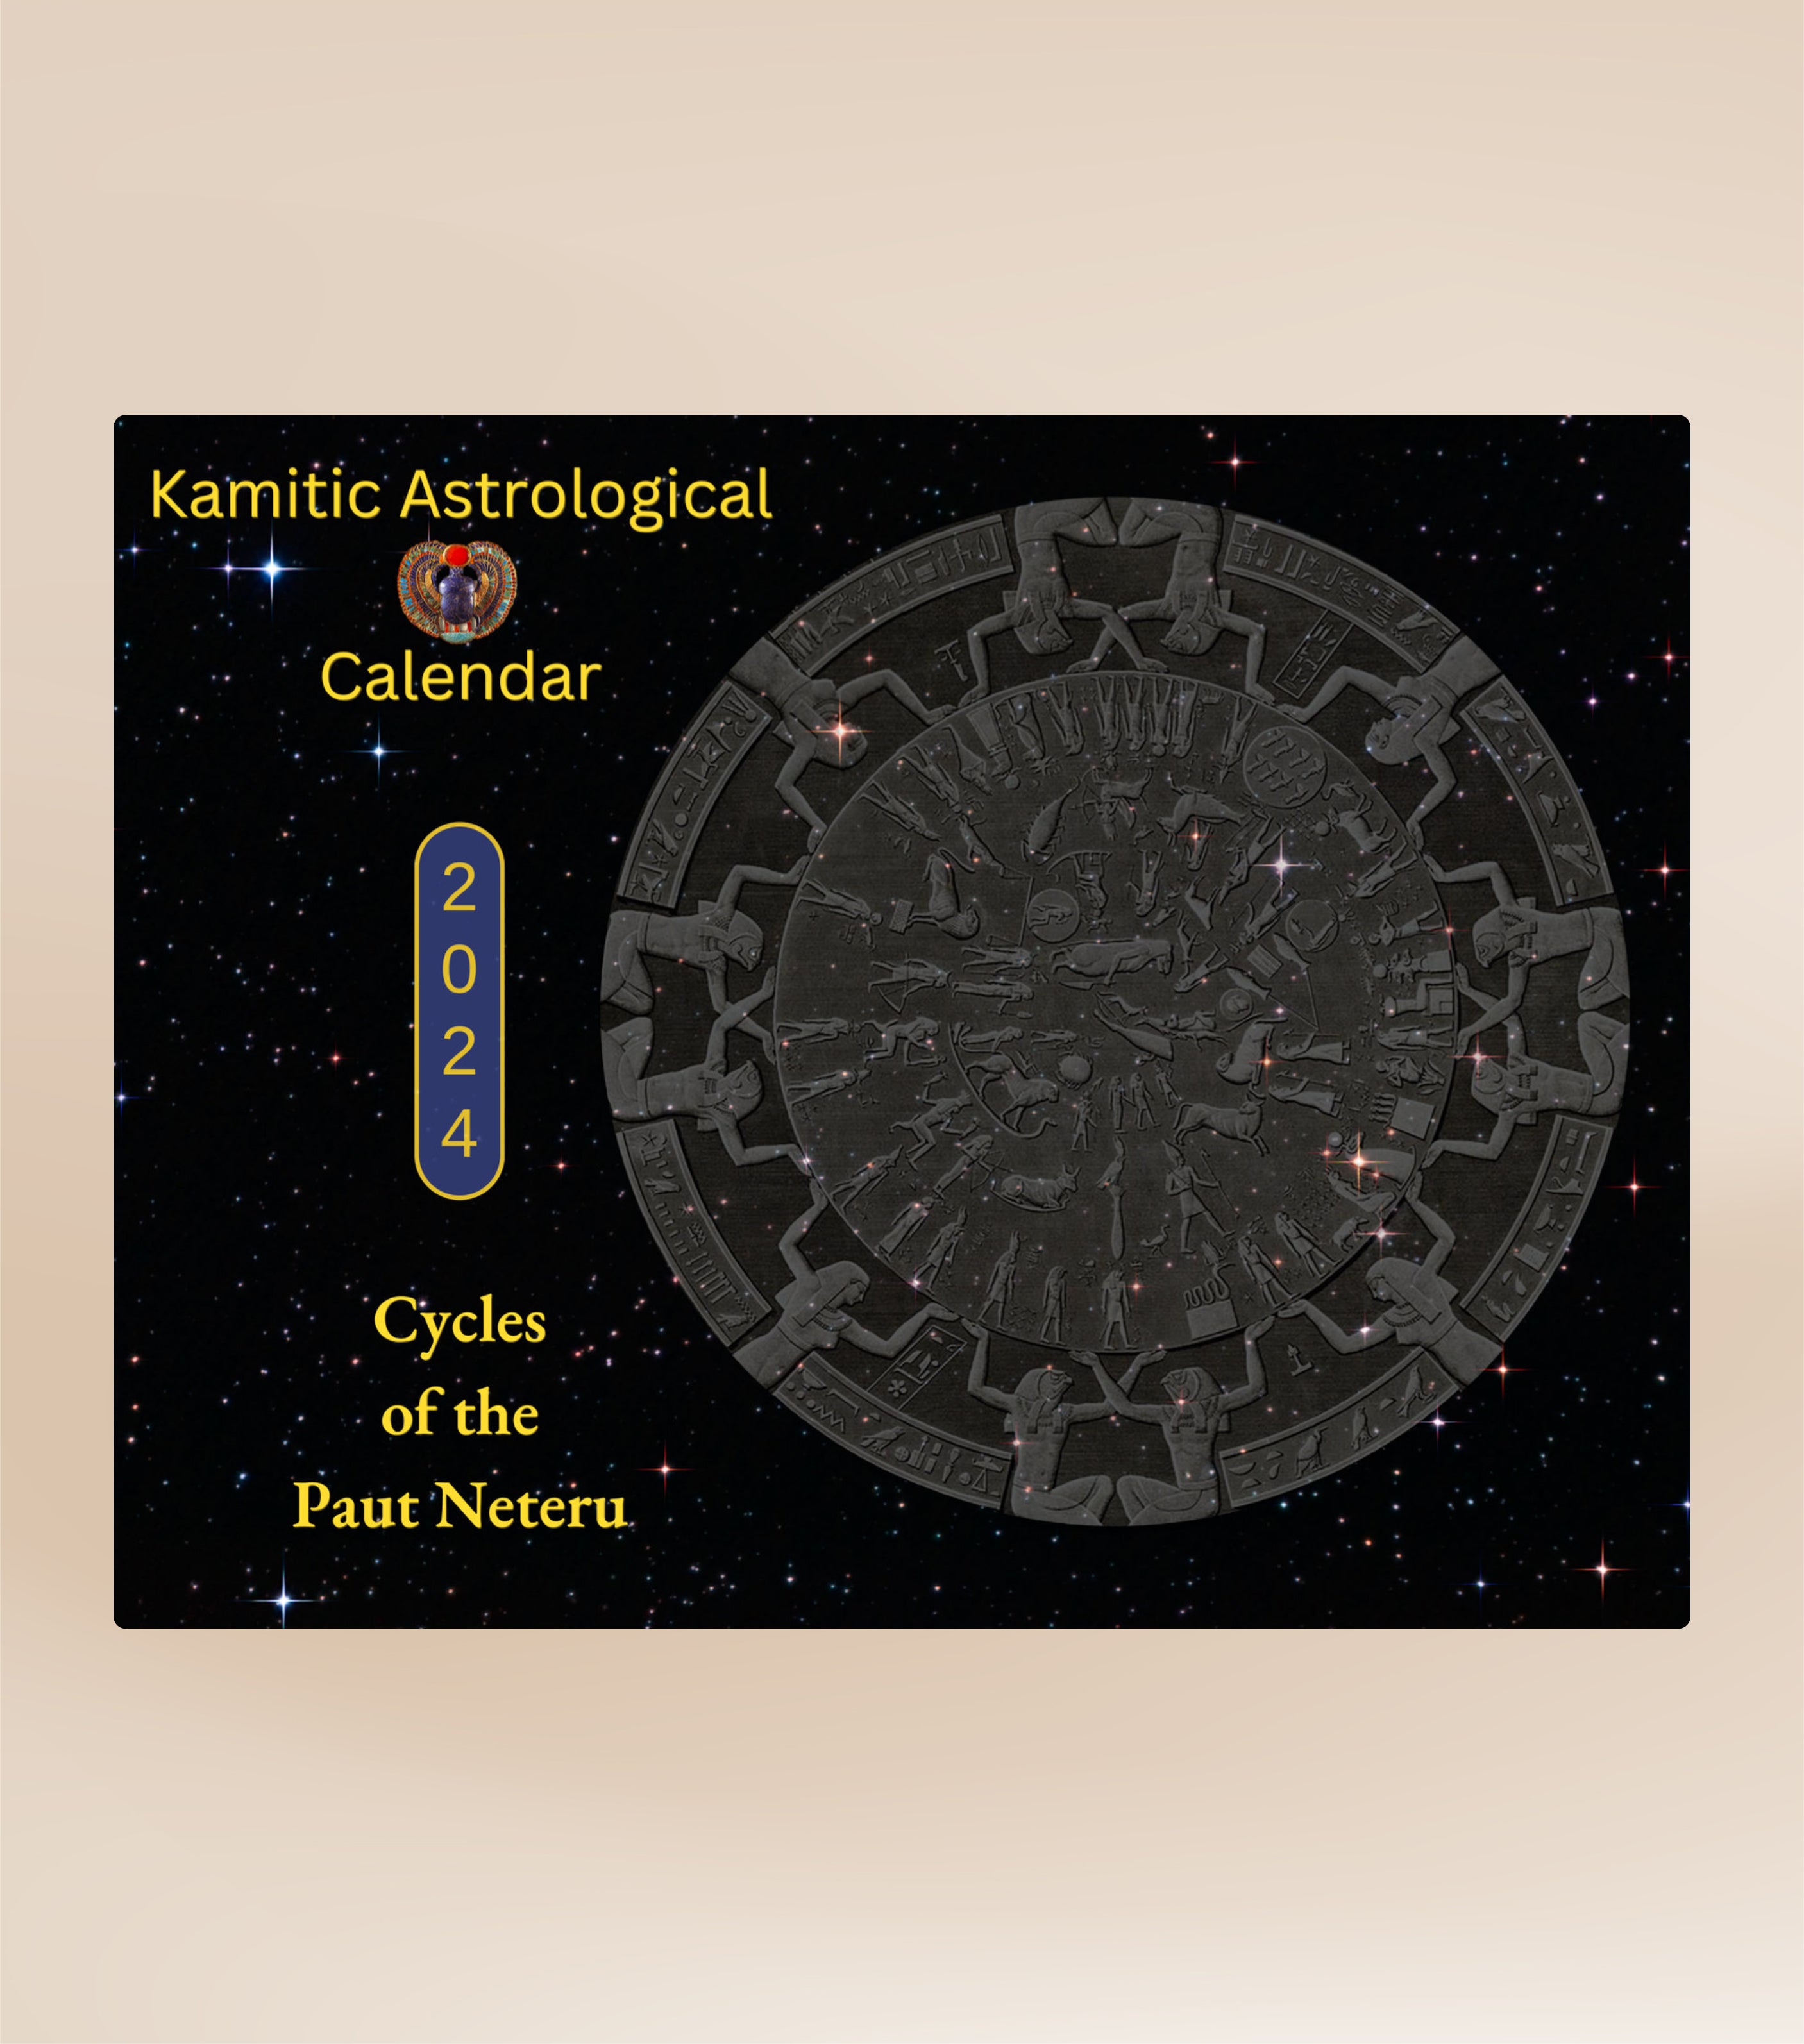 Kamitic Astrology Calendar (Link in Description to Buy Direct from Publisher)